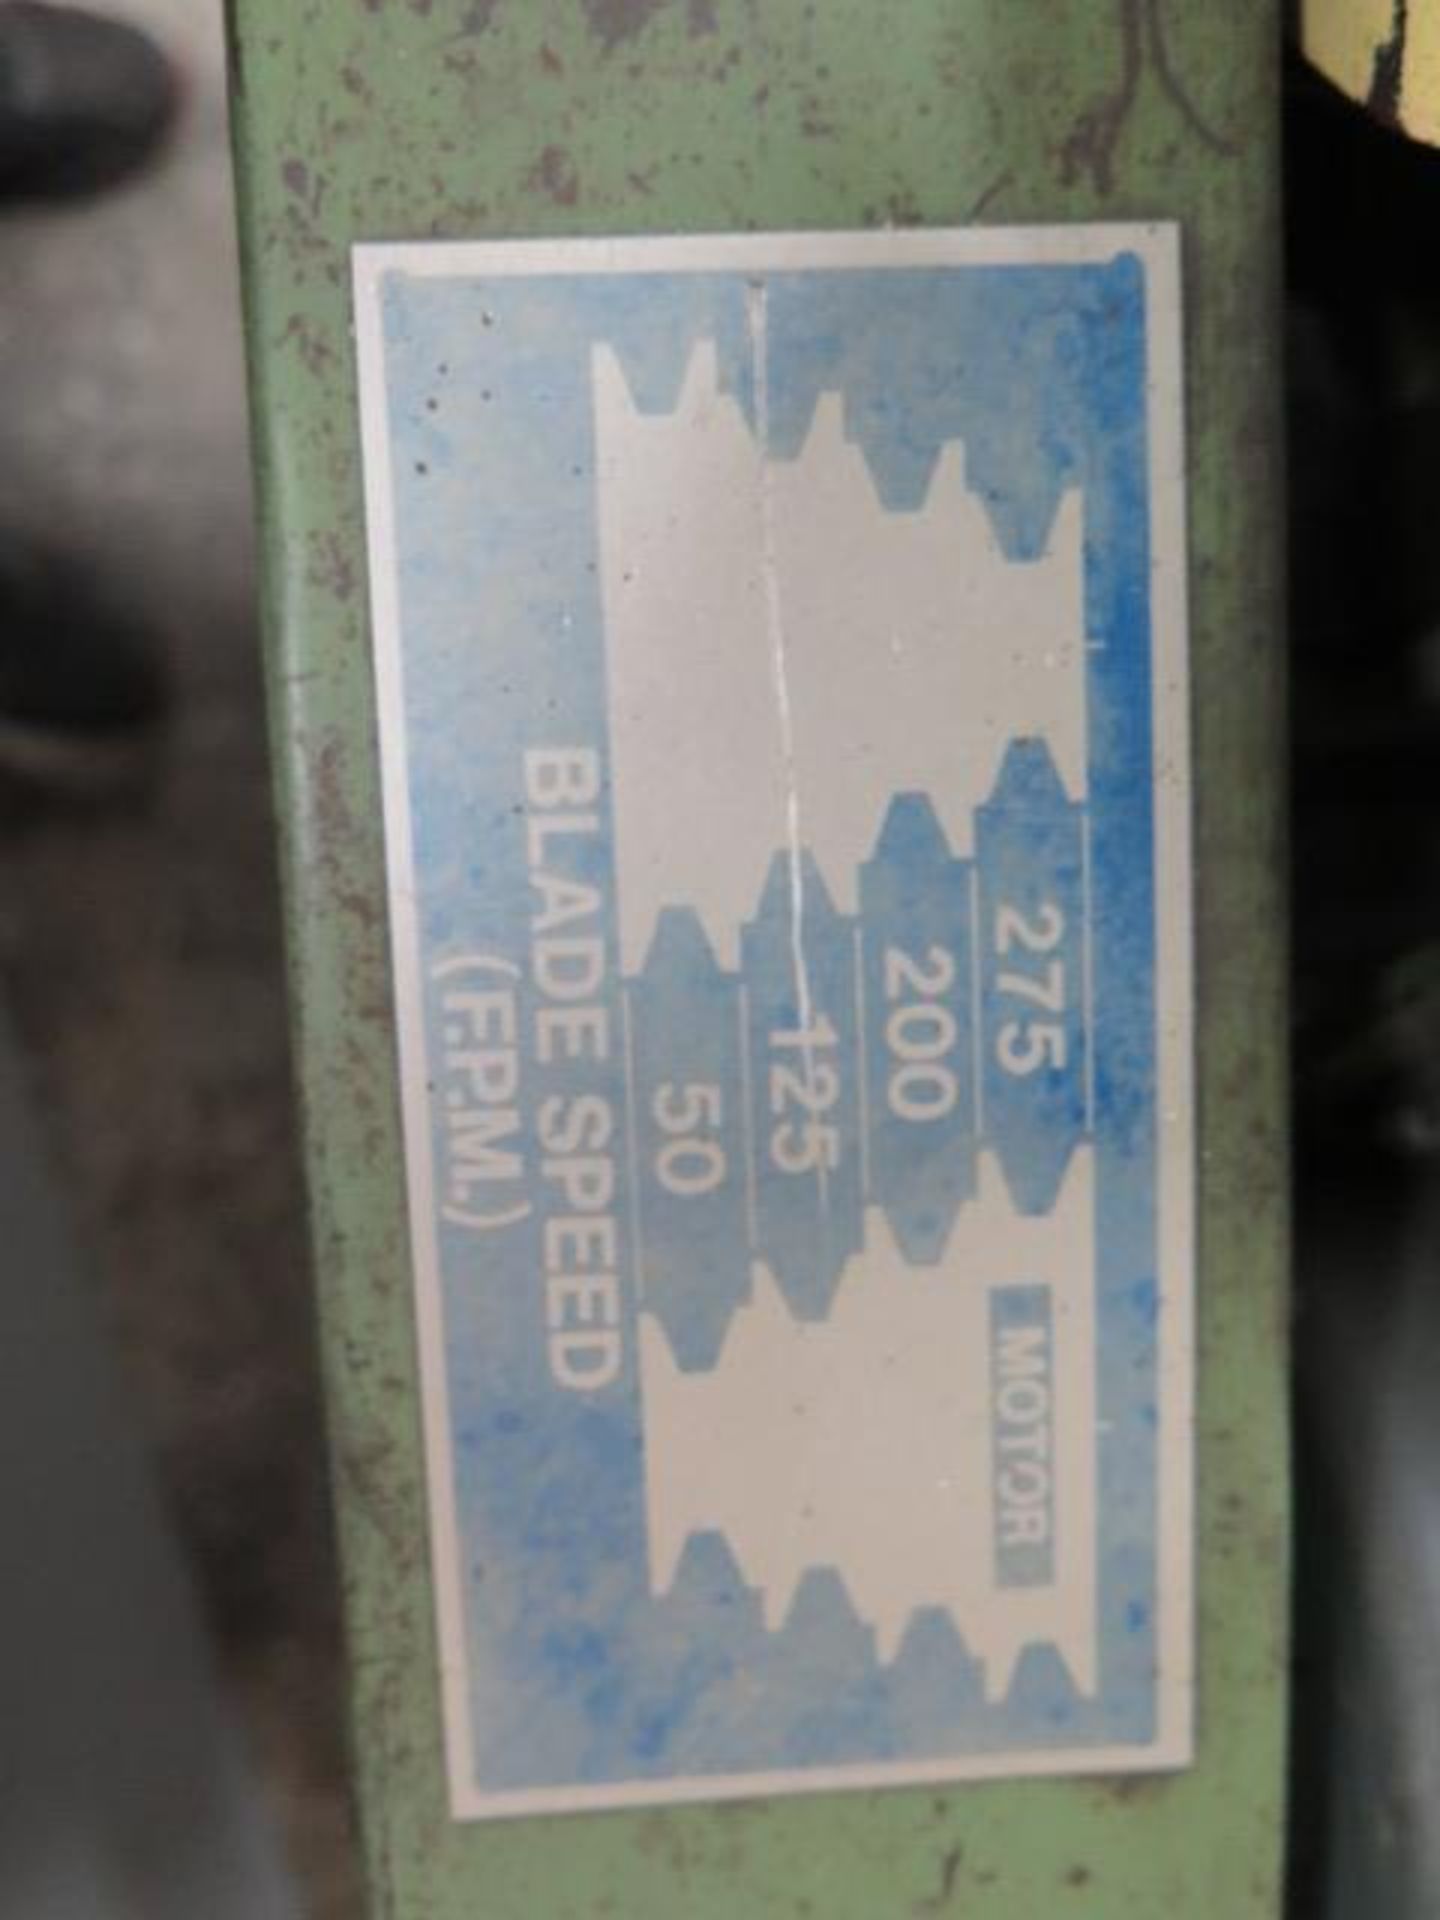 Import mdl. 9 9” Horizontal Band Saw (SOLD AS-IS - NO WARRANTY) - Image 7 of 7